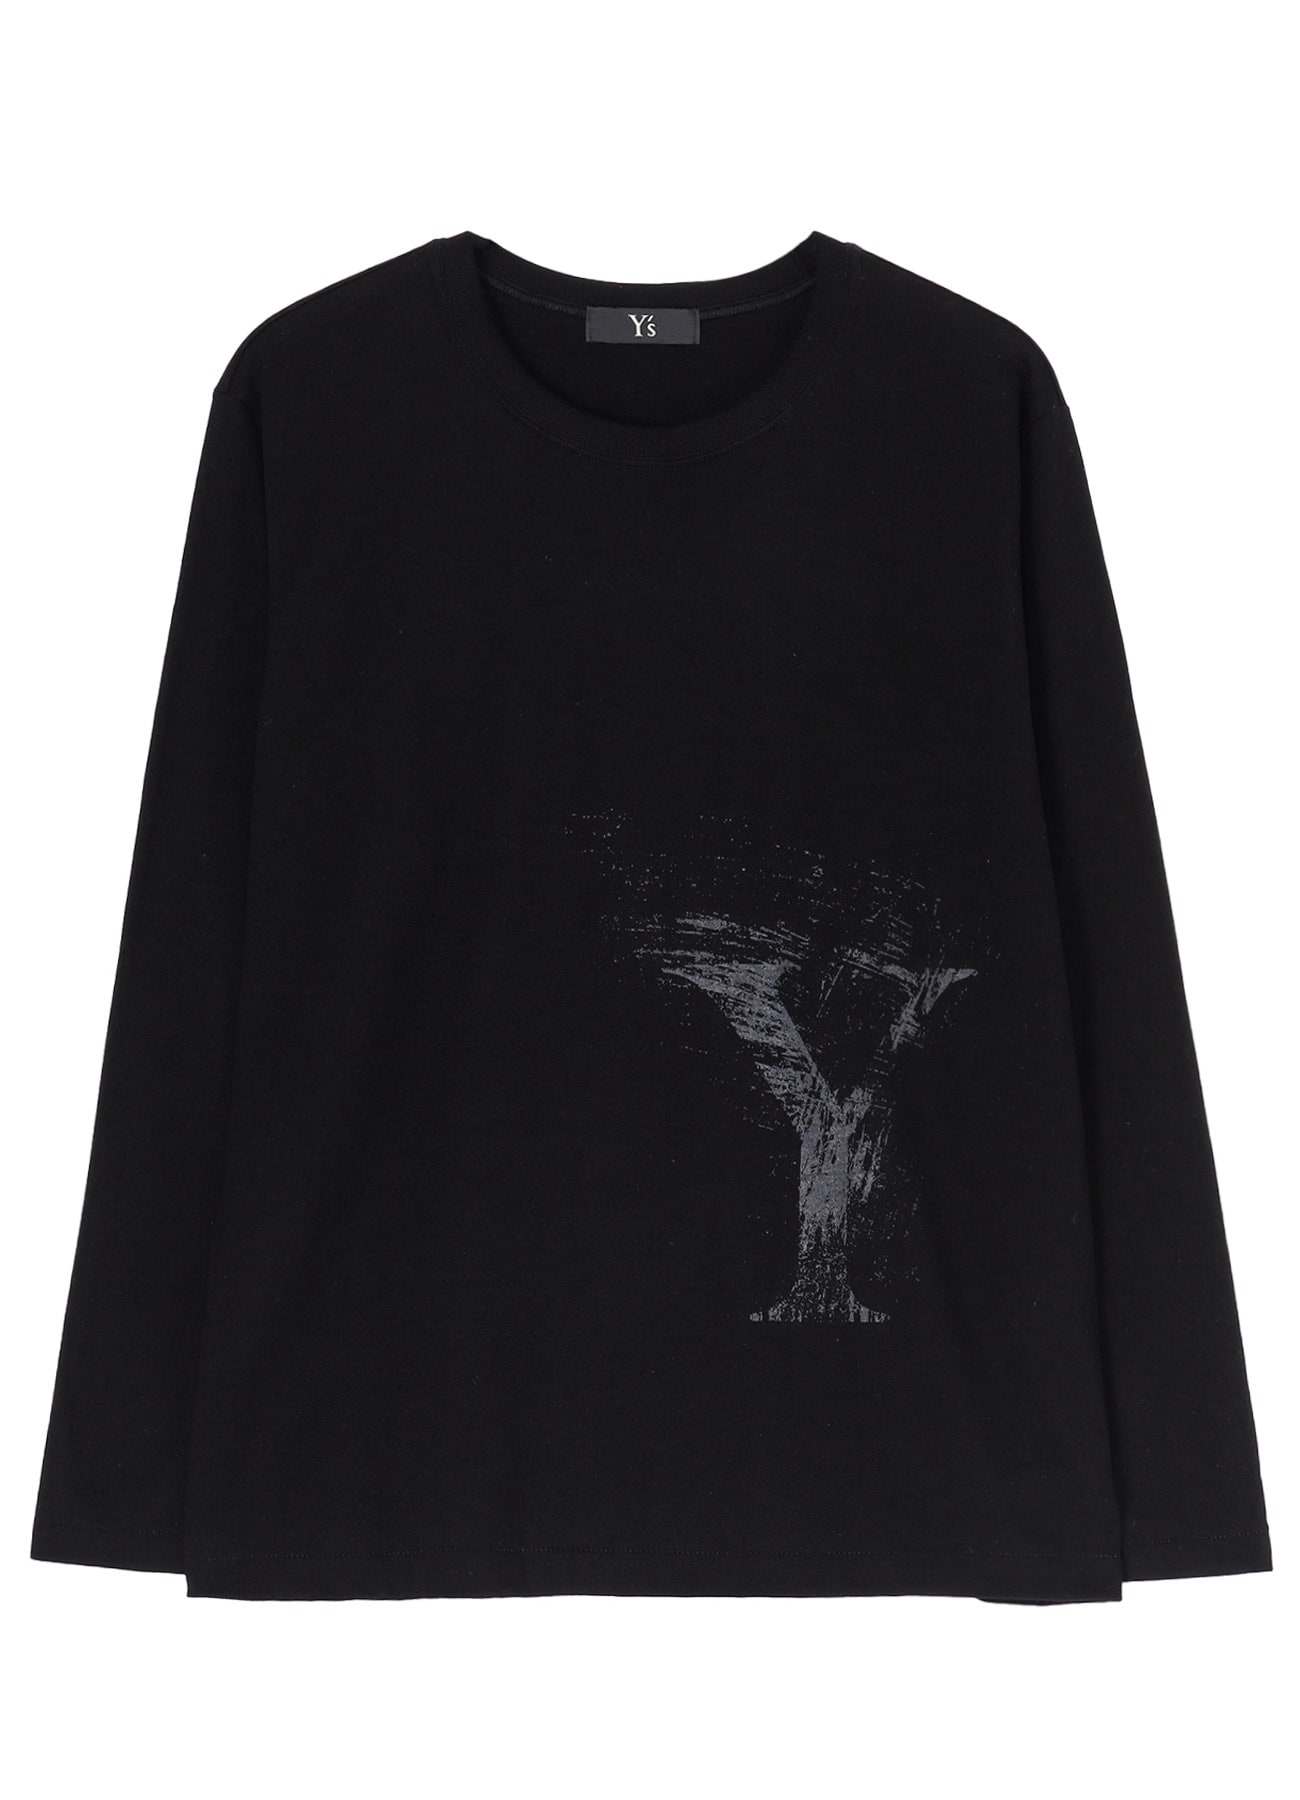 COTTON JERSEY LONG SLEEVE Y'S LOGO T